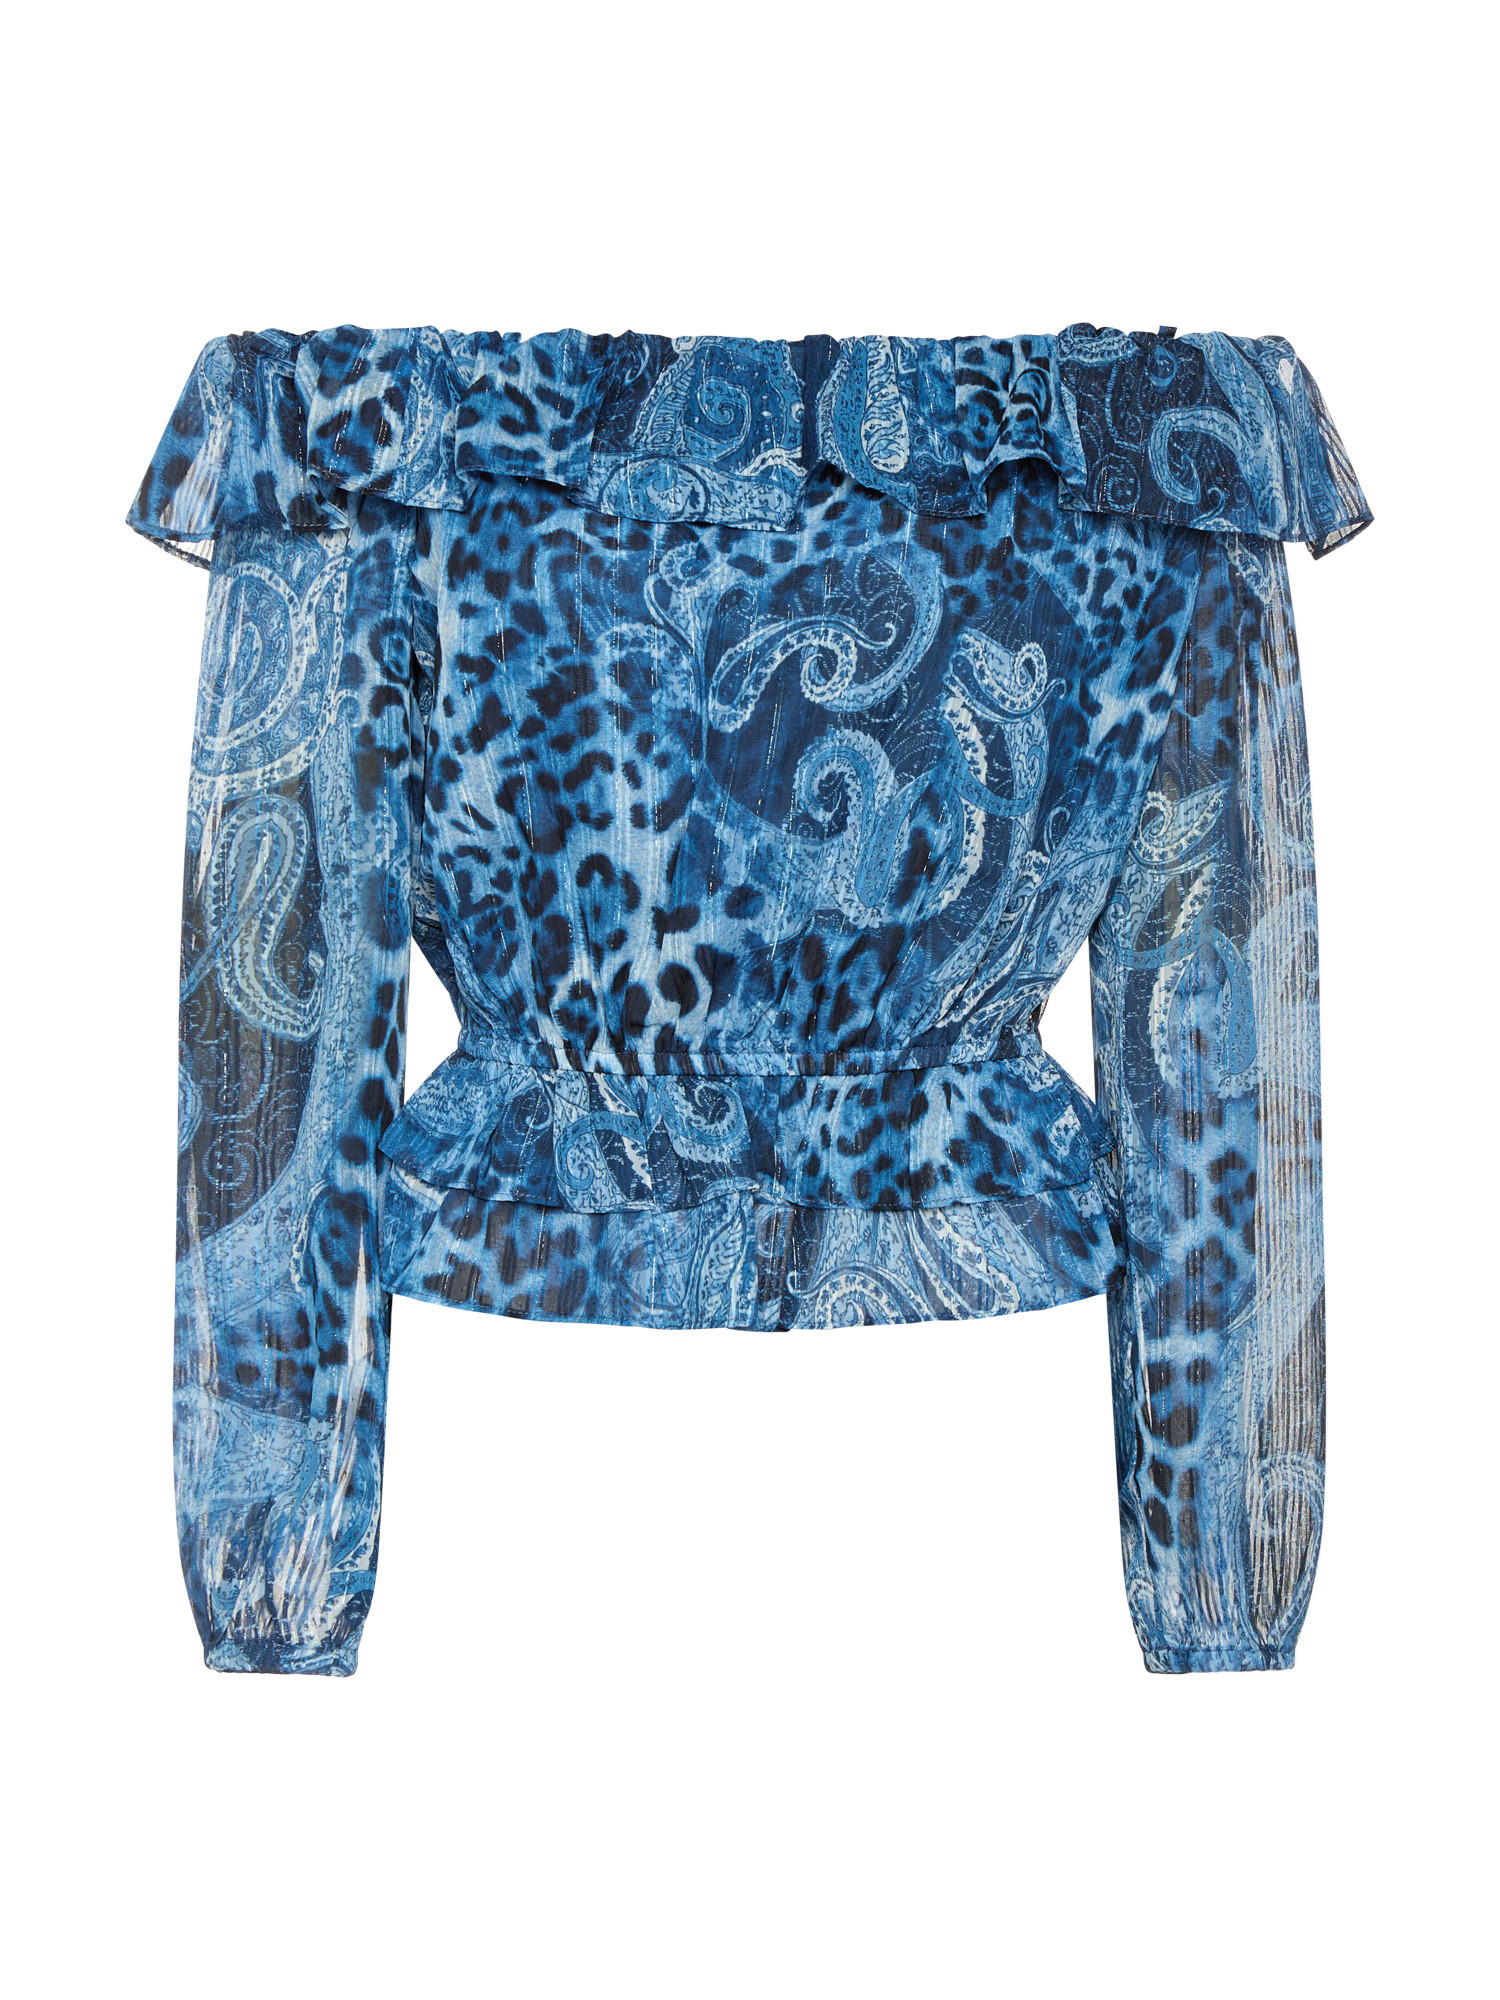 Guess - Blusa stampa paisley, Azzurro scuro, large image number 0